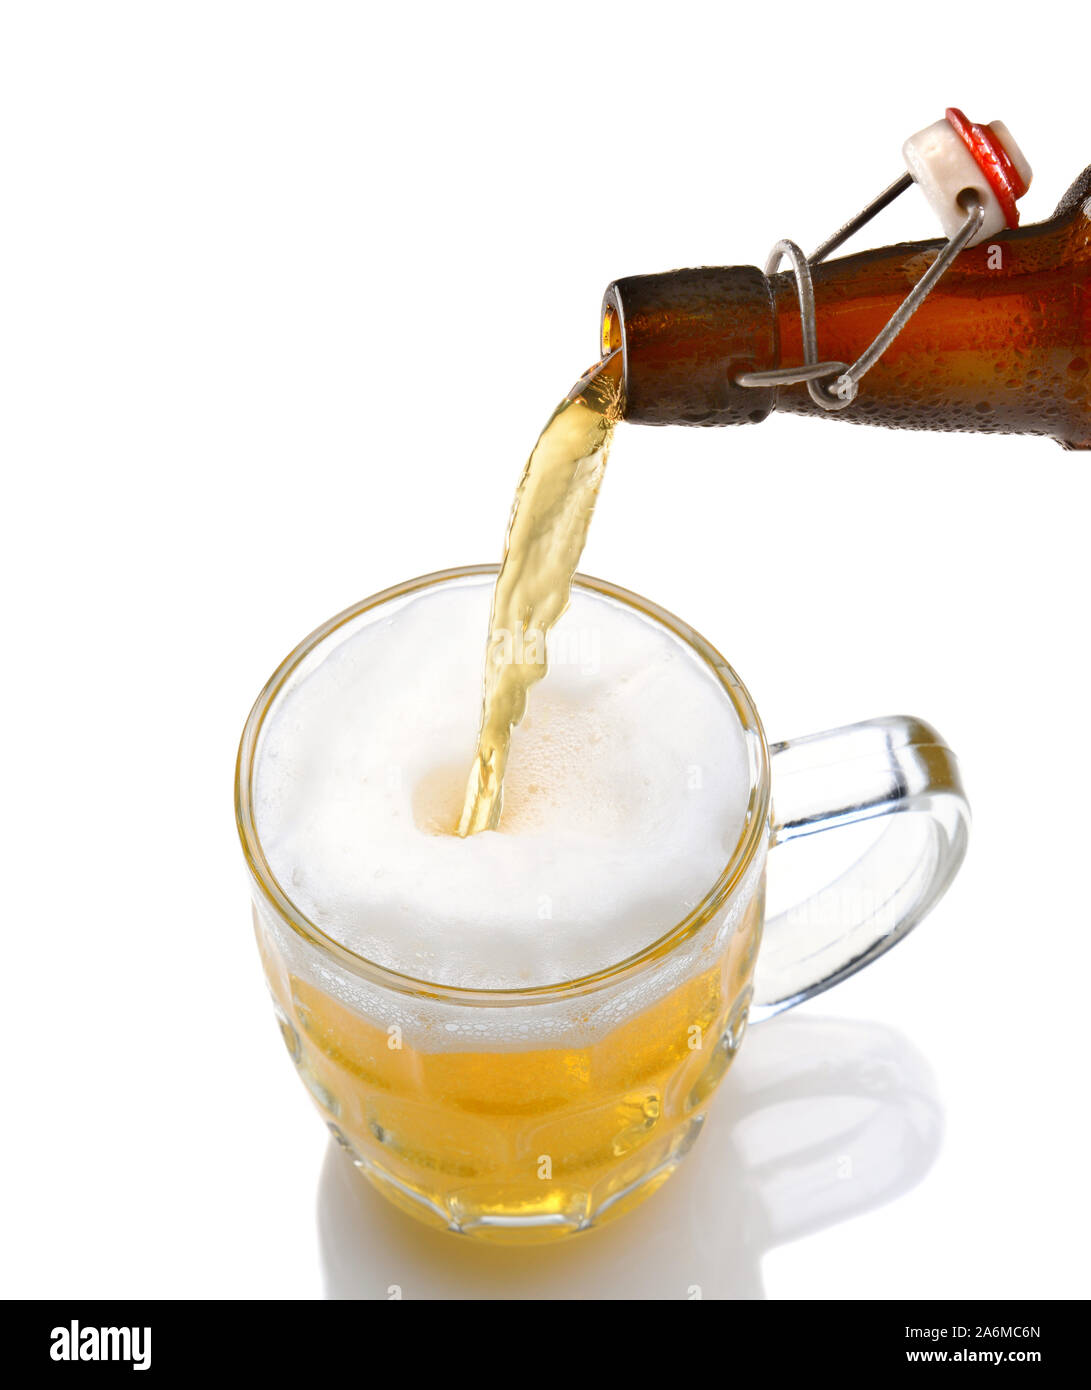 Cold beer pouring from a bottle into a mug on a white background with reflection. Stock Photo